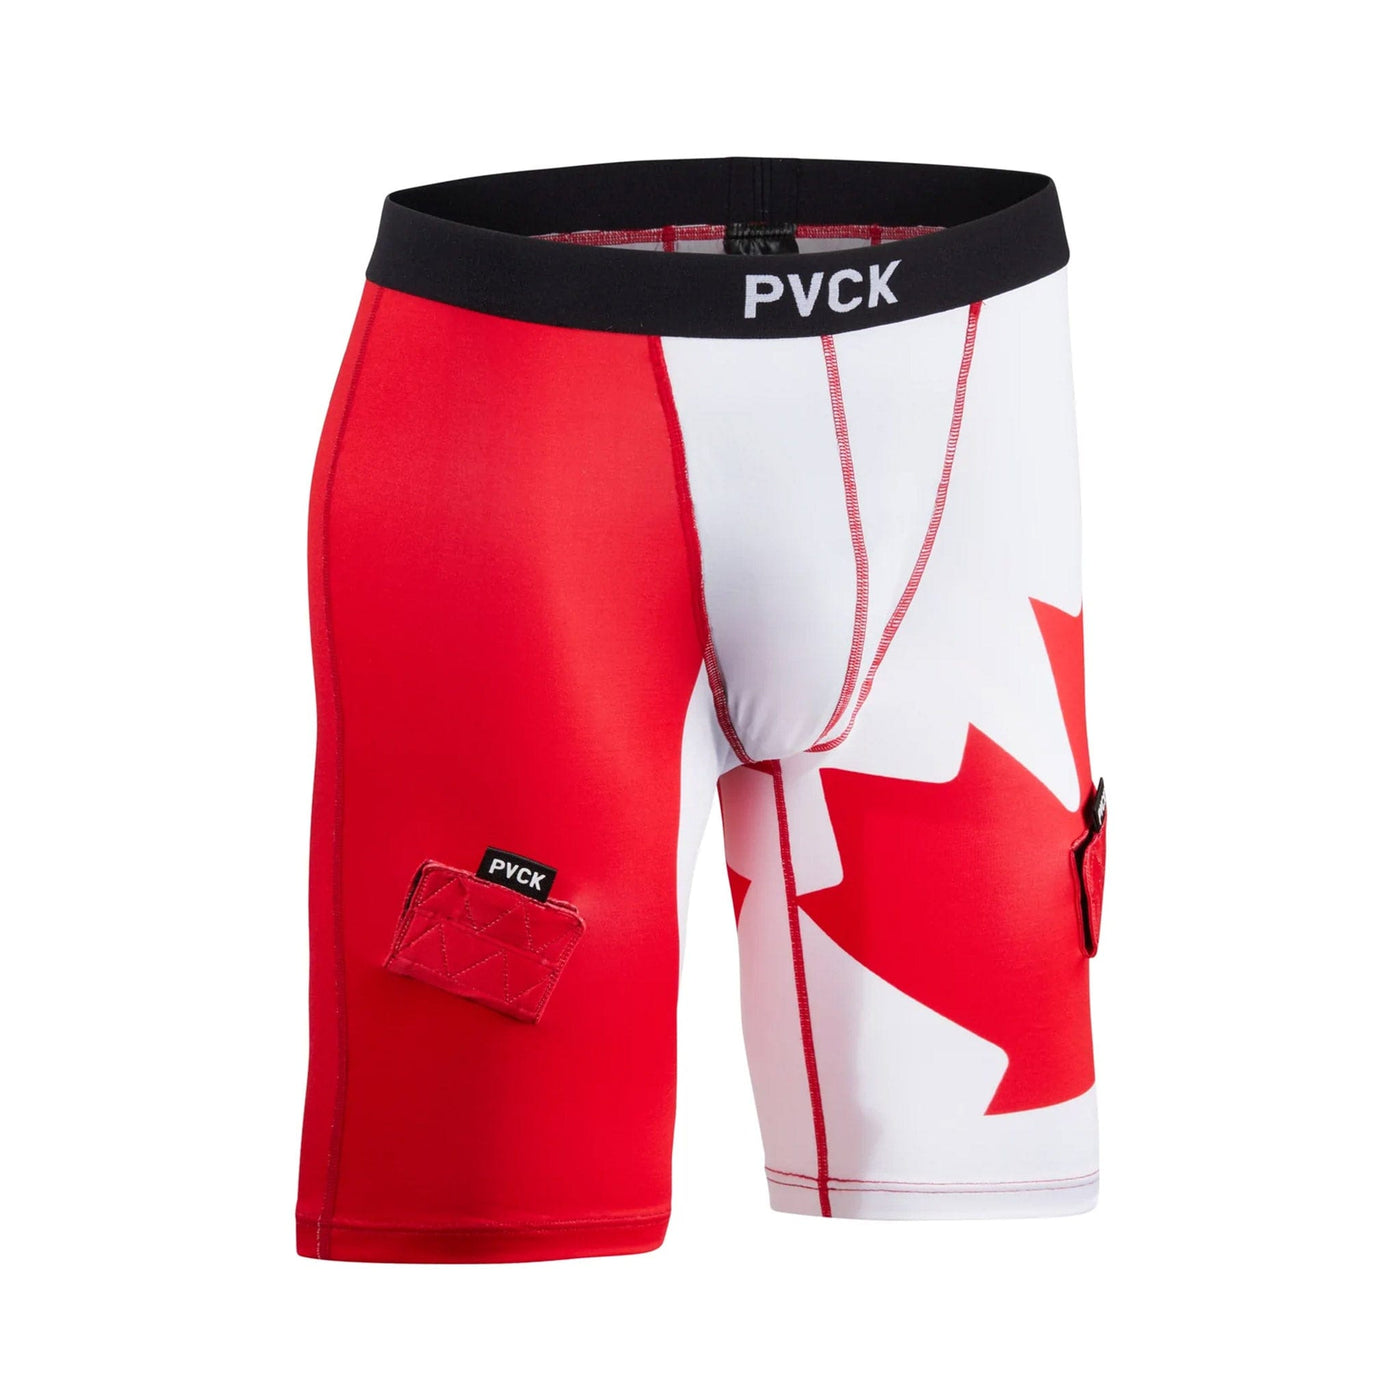 PVCK Junior Compression Jock Shorts - Canada - The Hockey Shop Source For Sports